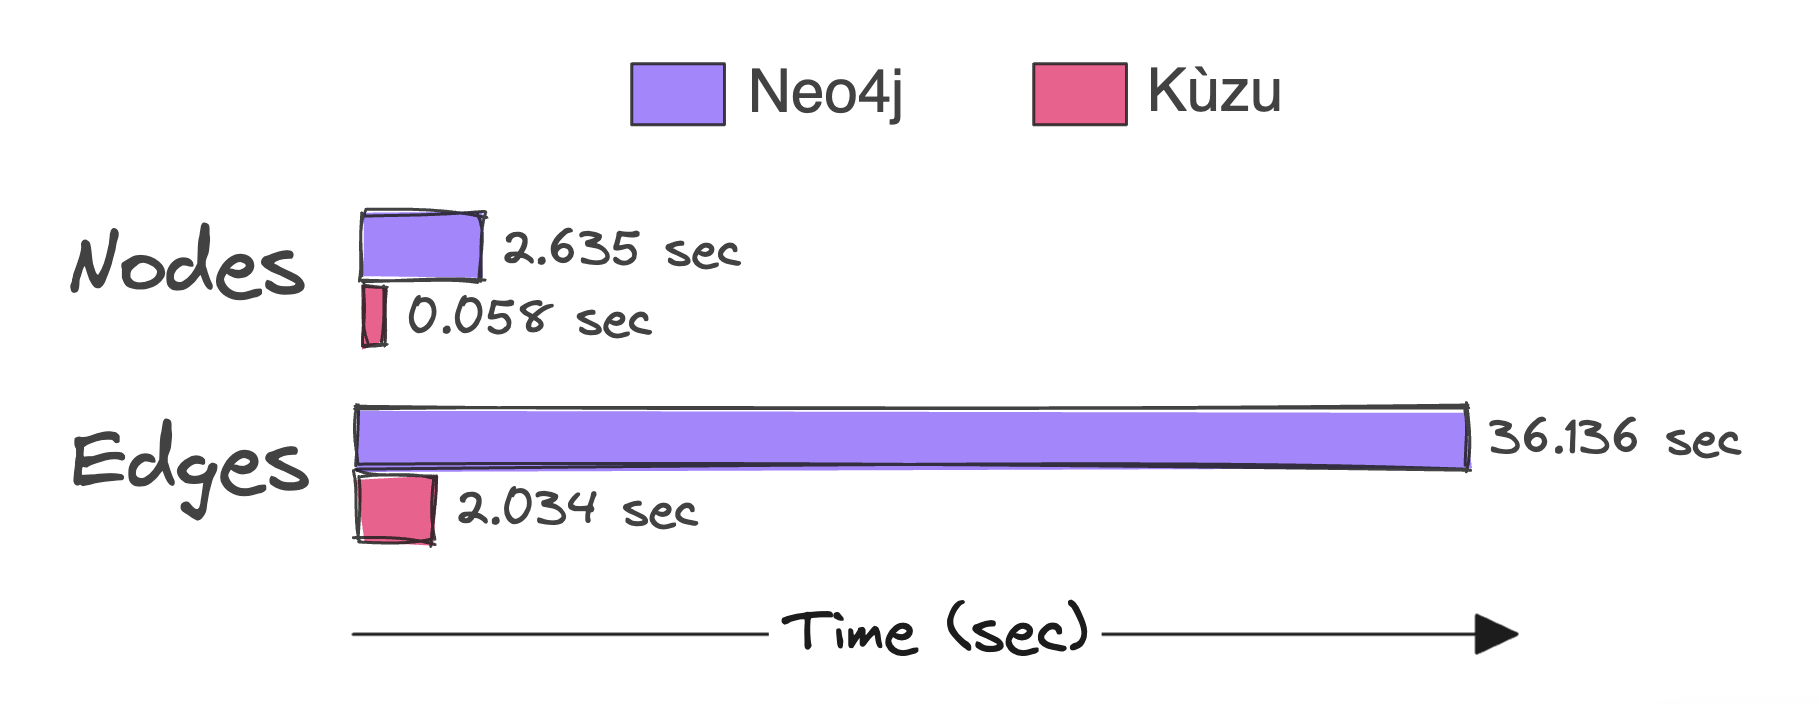 When ingesting data via their Python clients, Kùzu is ~18x faster than Neo4j for this dataset